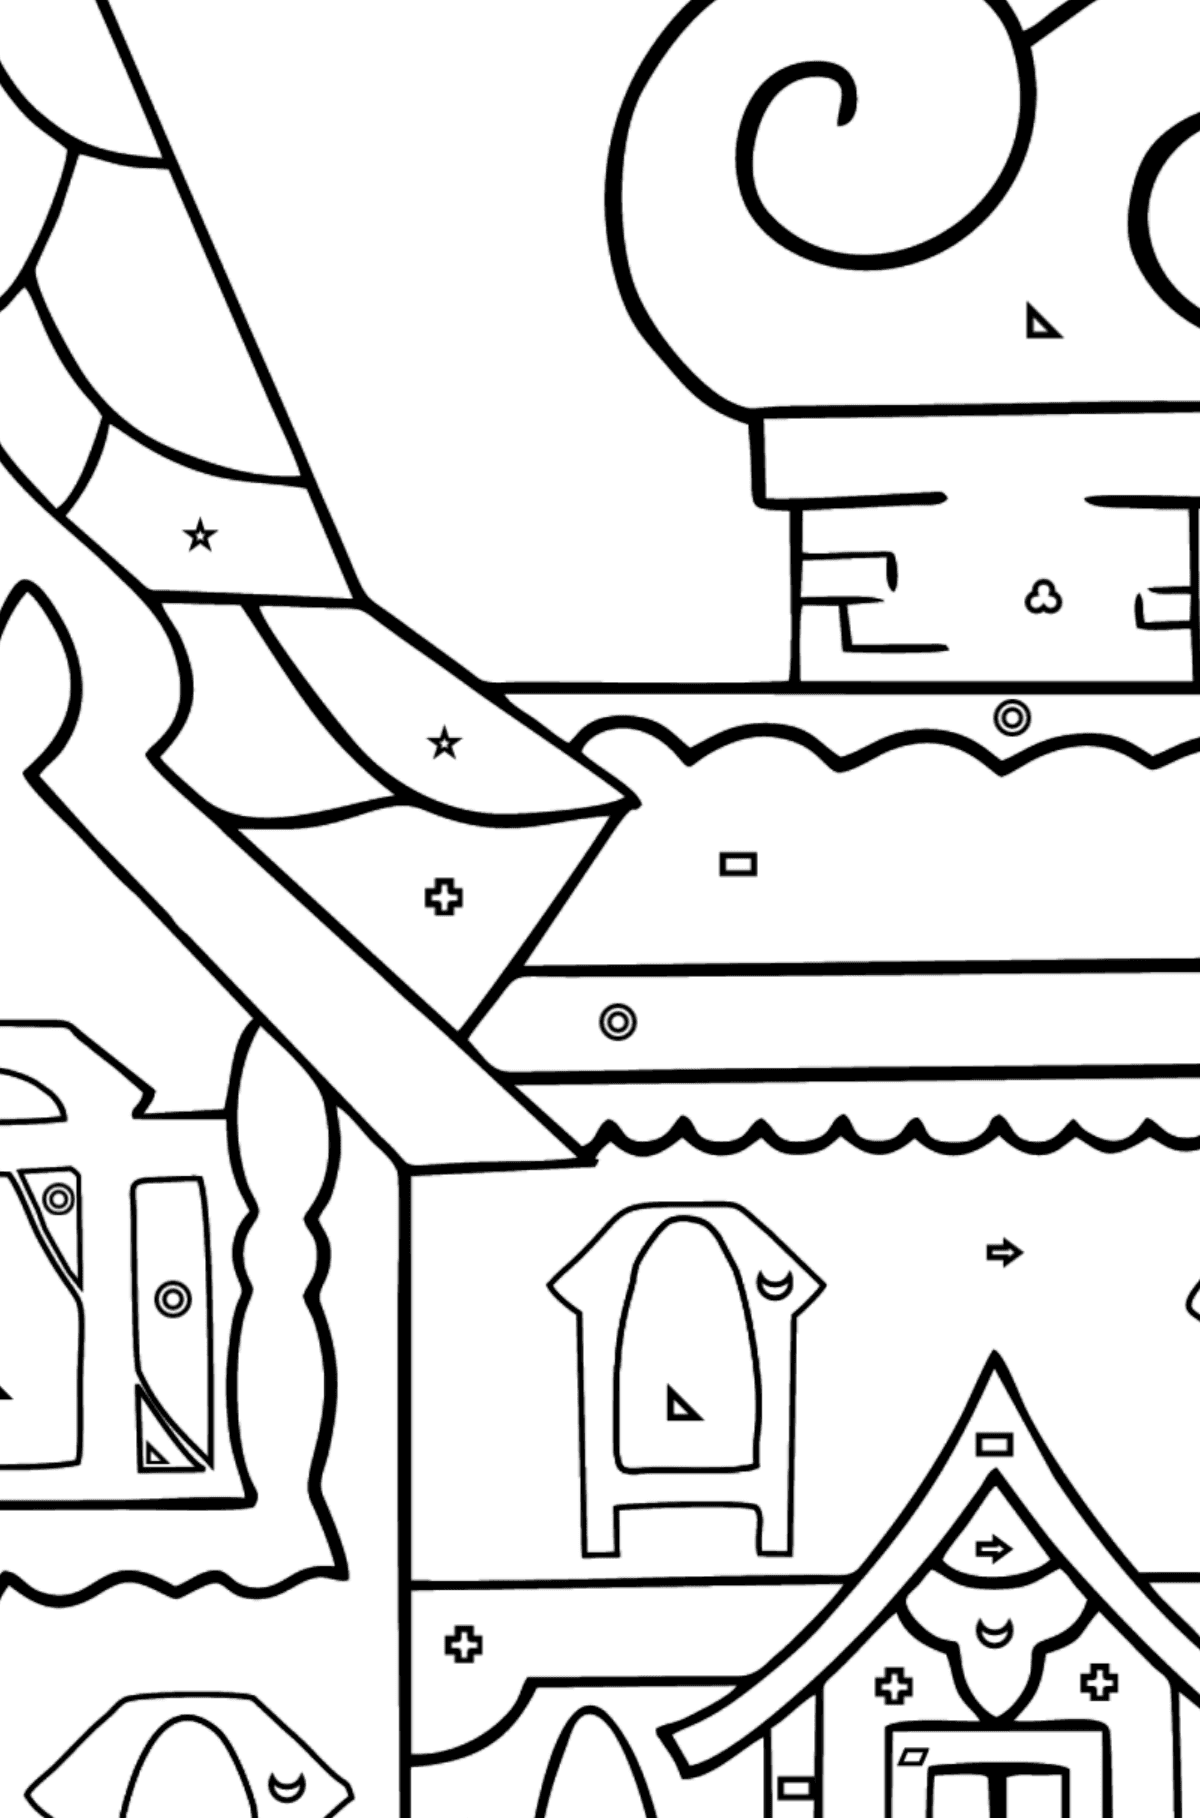 Coloring Page - A House - A Kingdom of Storytellers - Coloring by Geometric Shapes for Kids